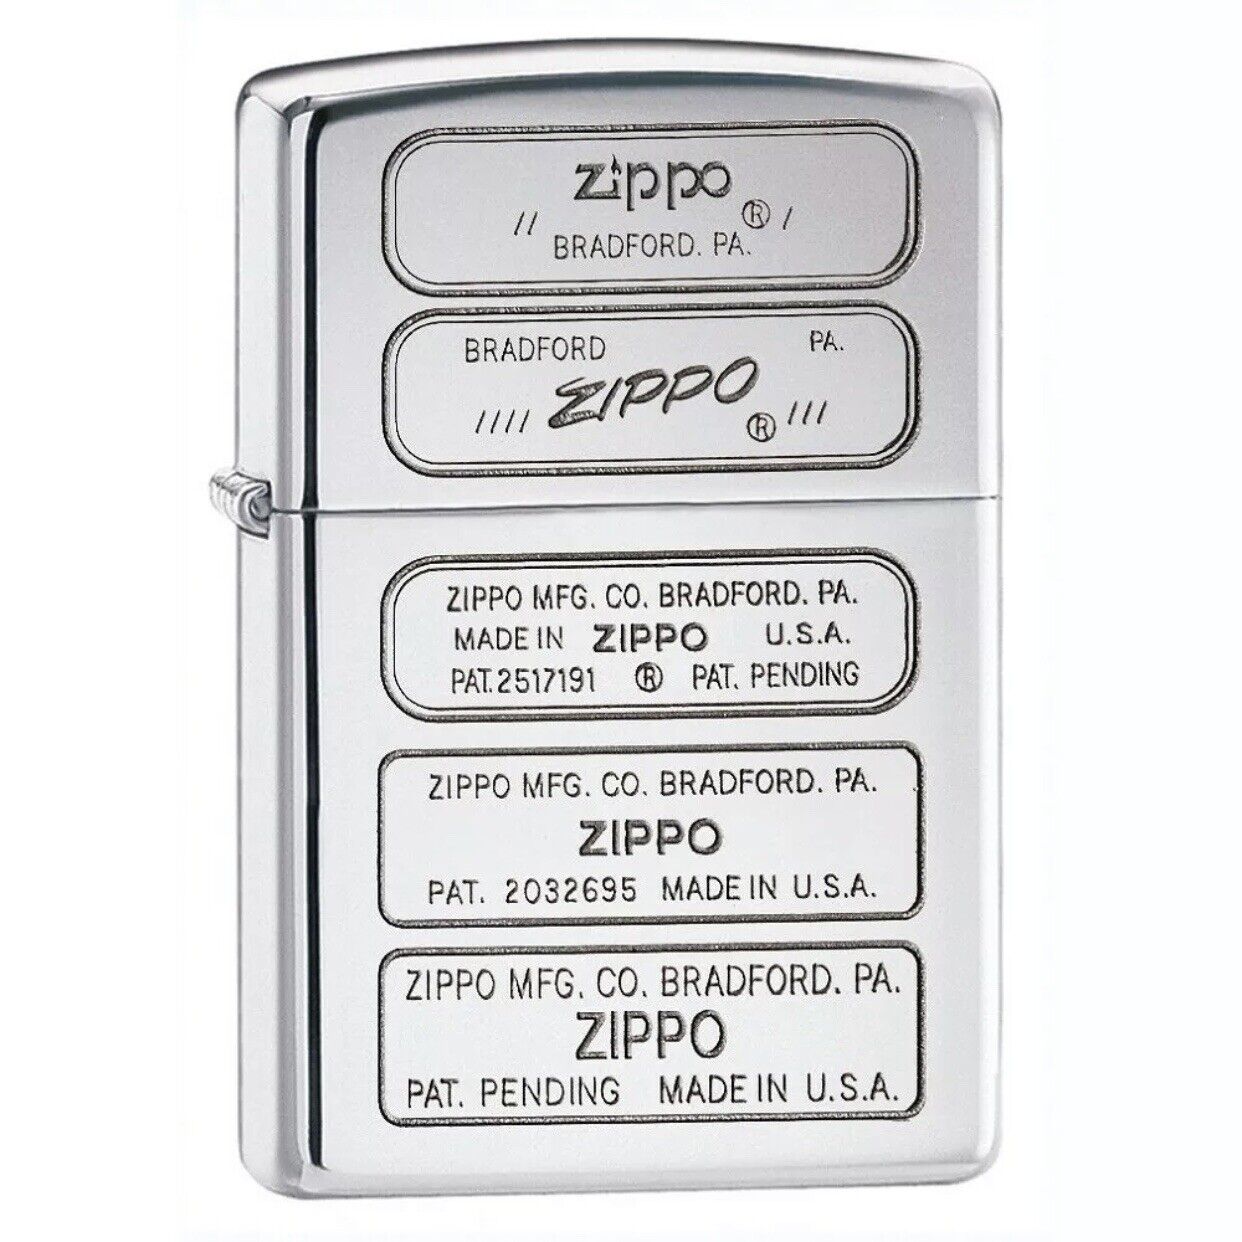 **RARE** New Zippo 28381 Bottom Stamped Lighter Made in USA Version - 